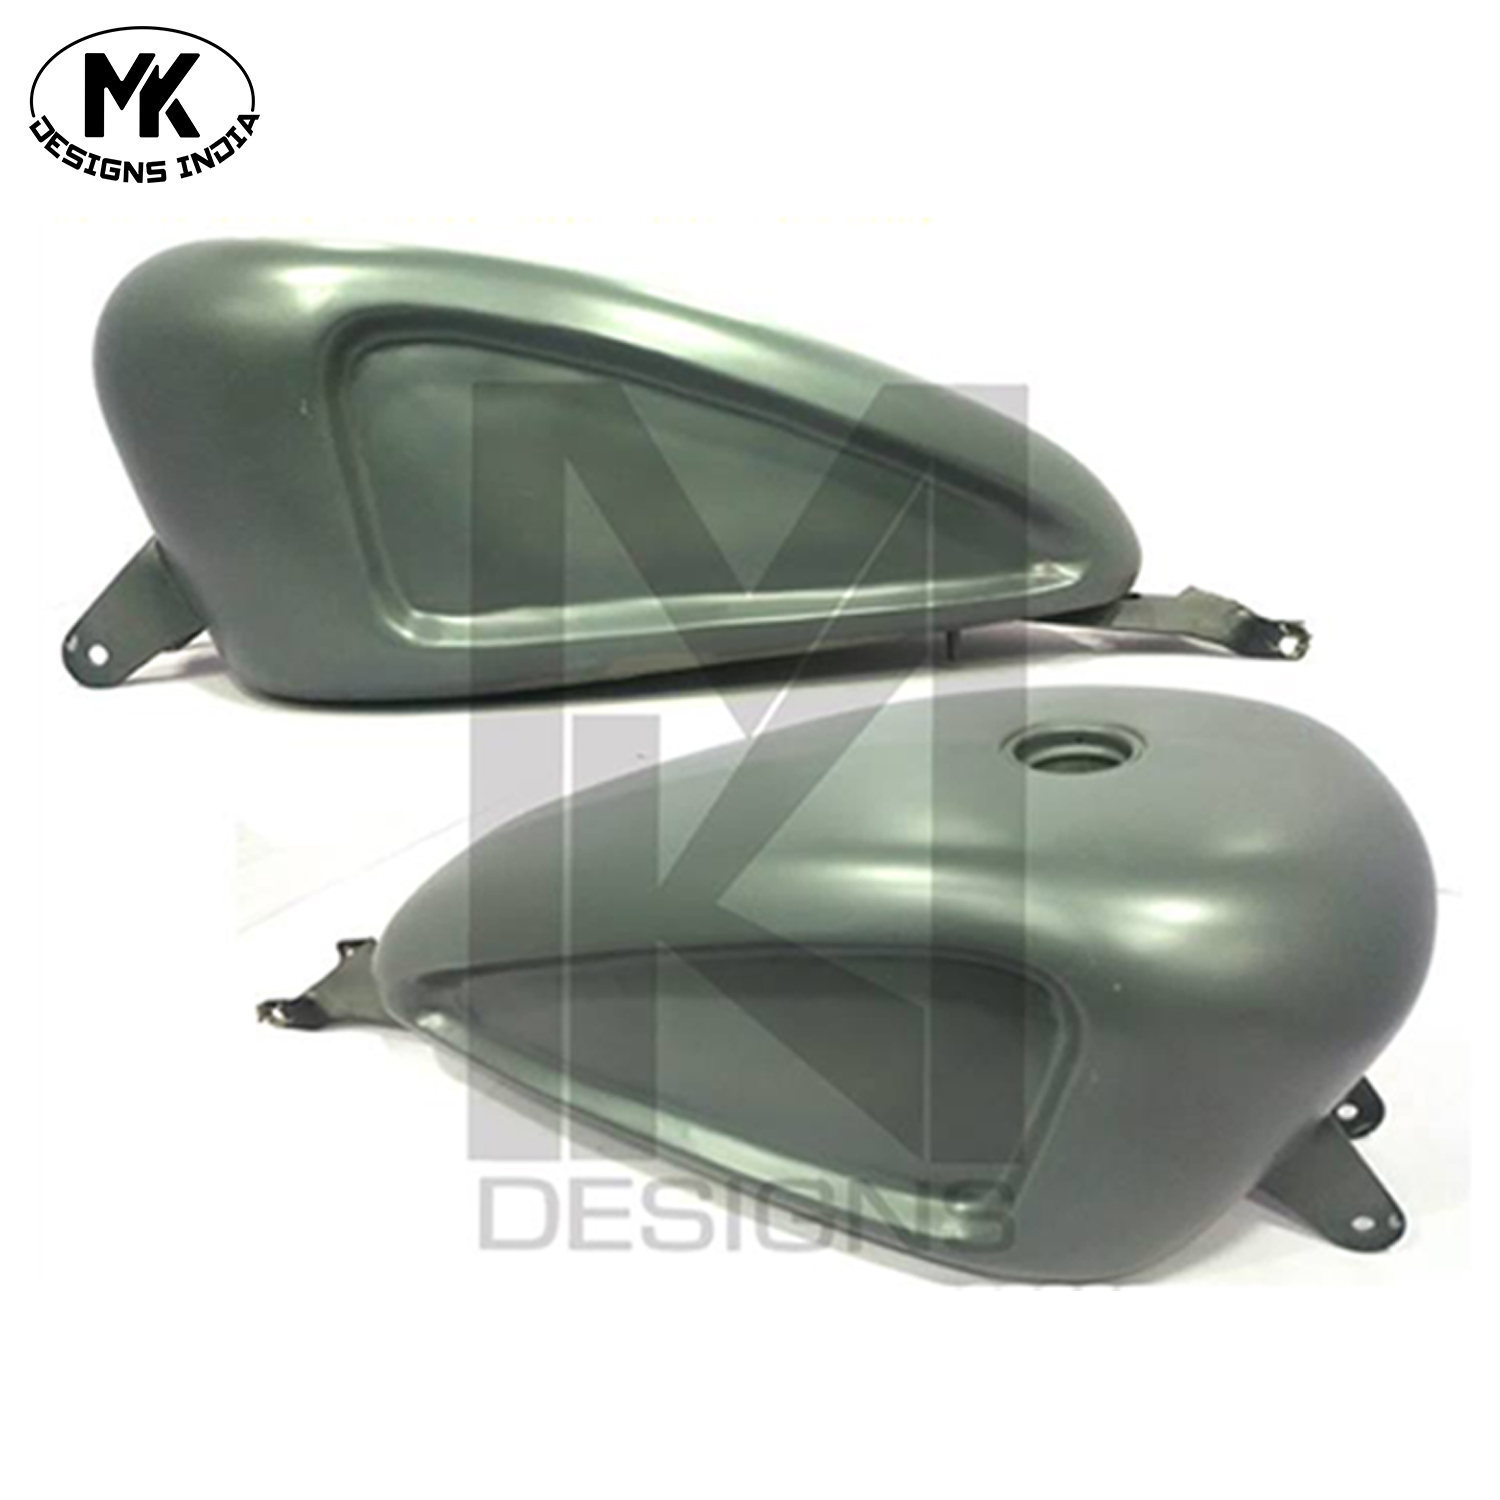 MK Designs India 3 Tank Lift for Harley Davidson Iron 883 at best